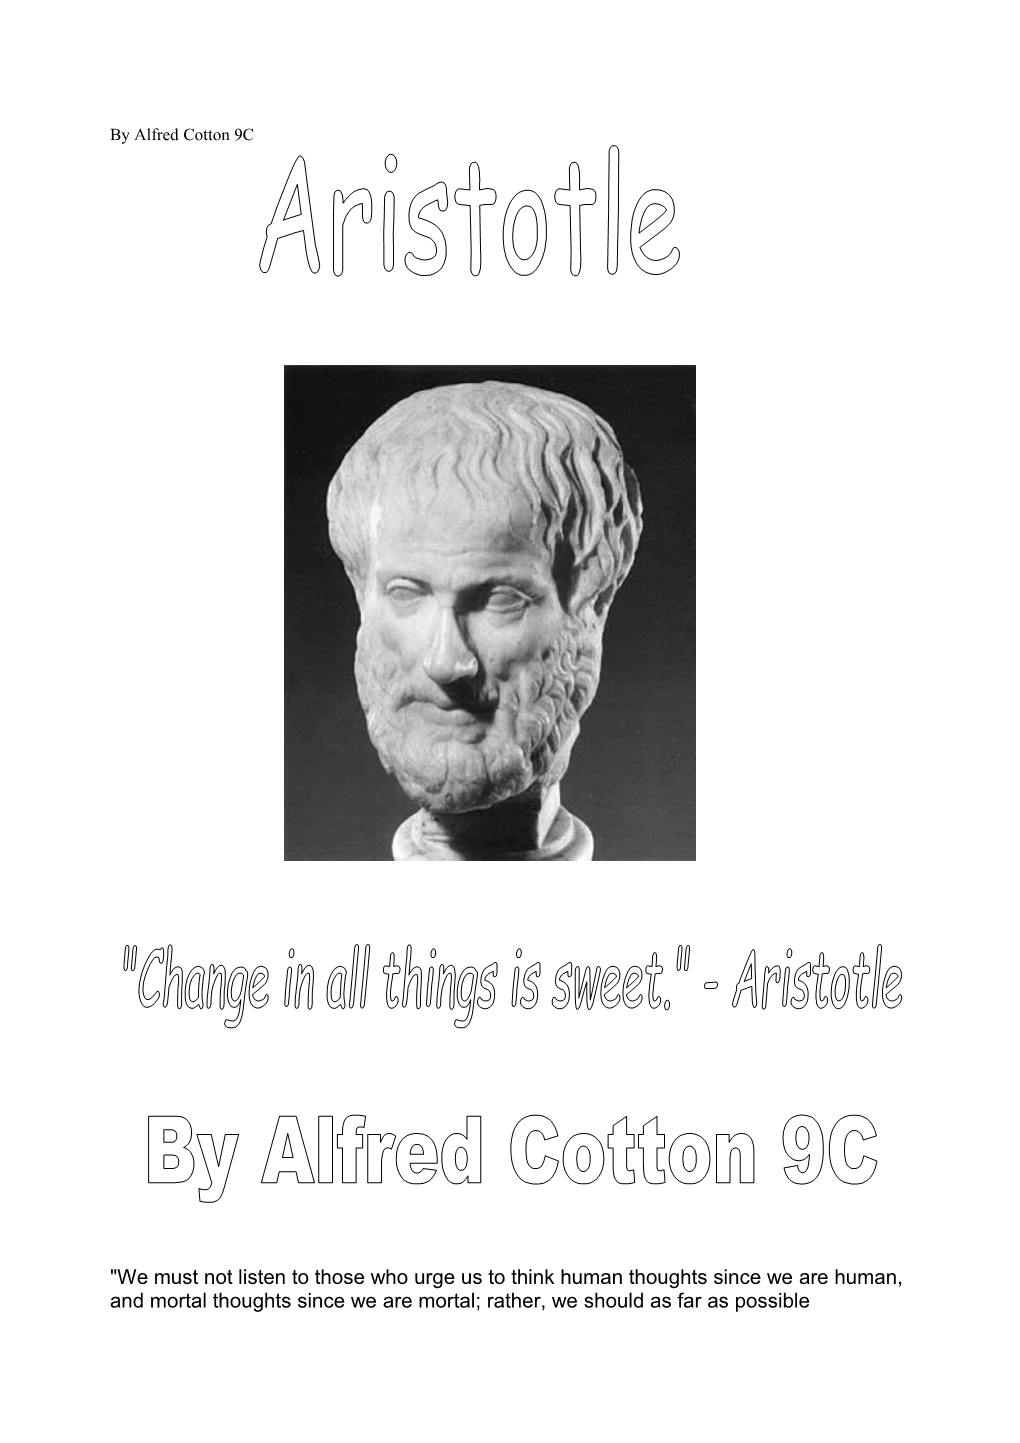 Aristotle: His Importance and Reputation